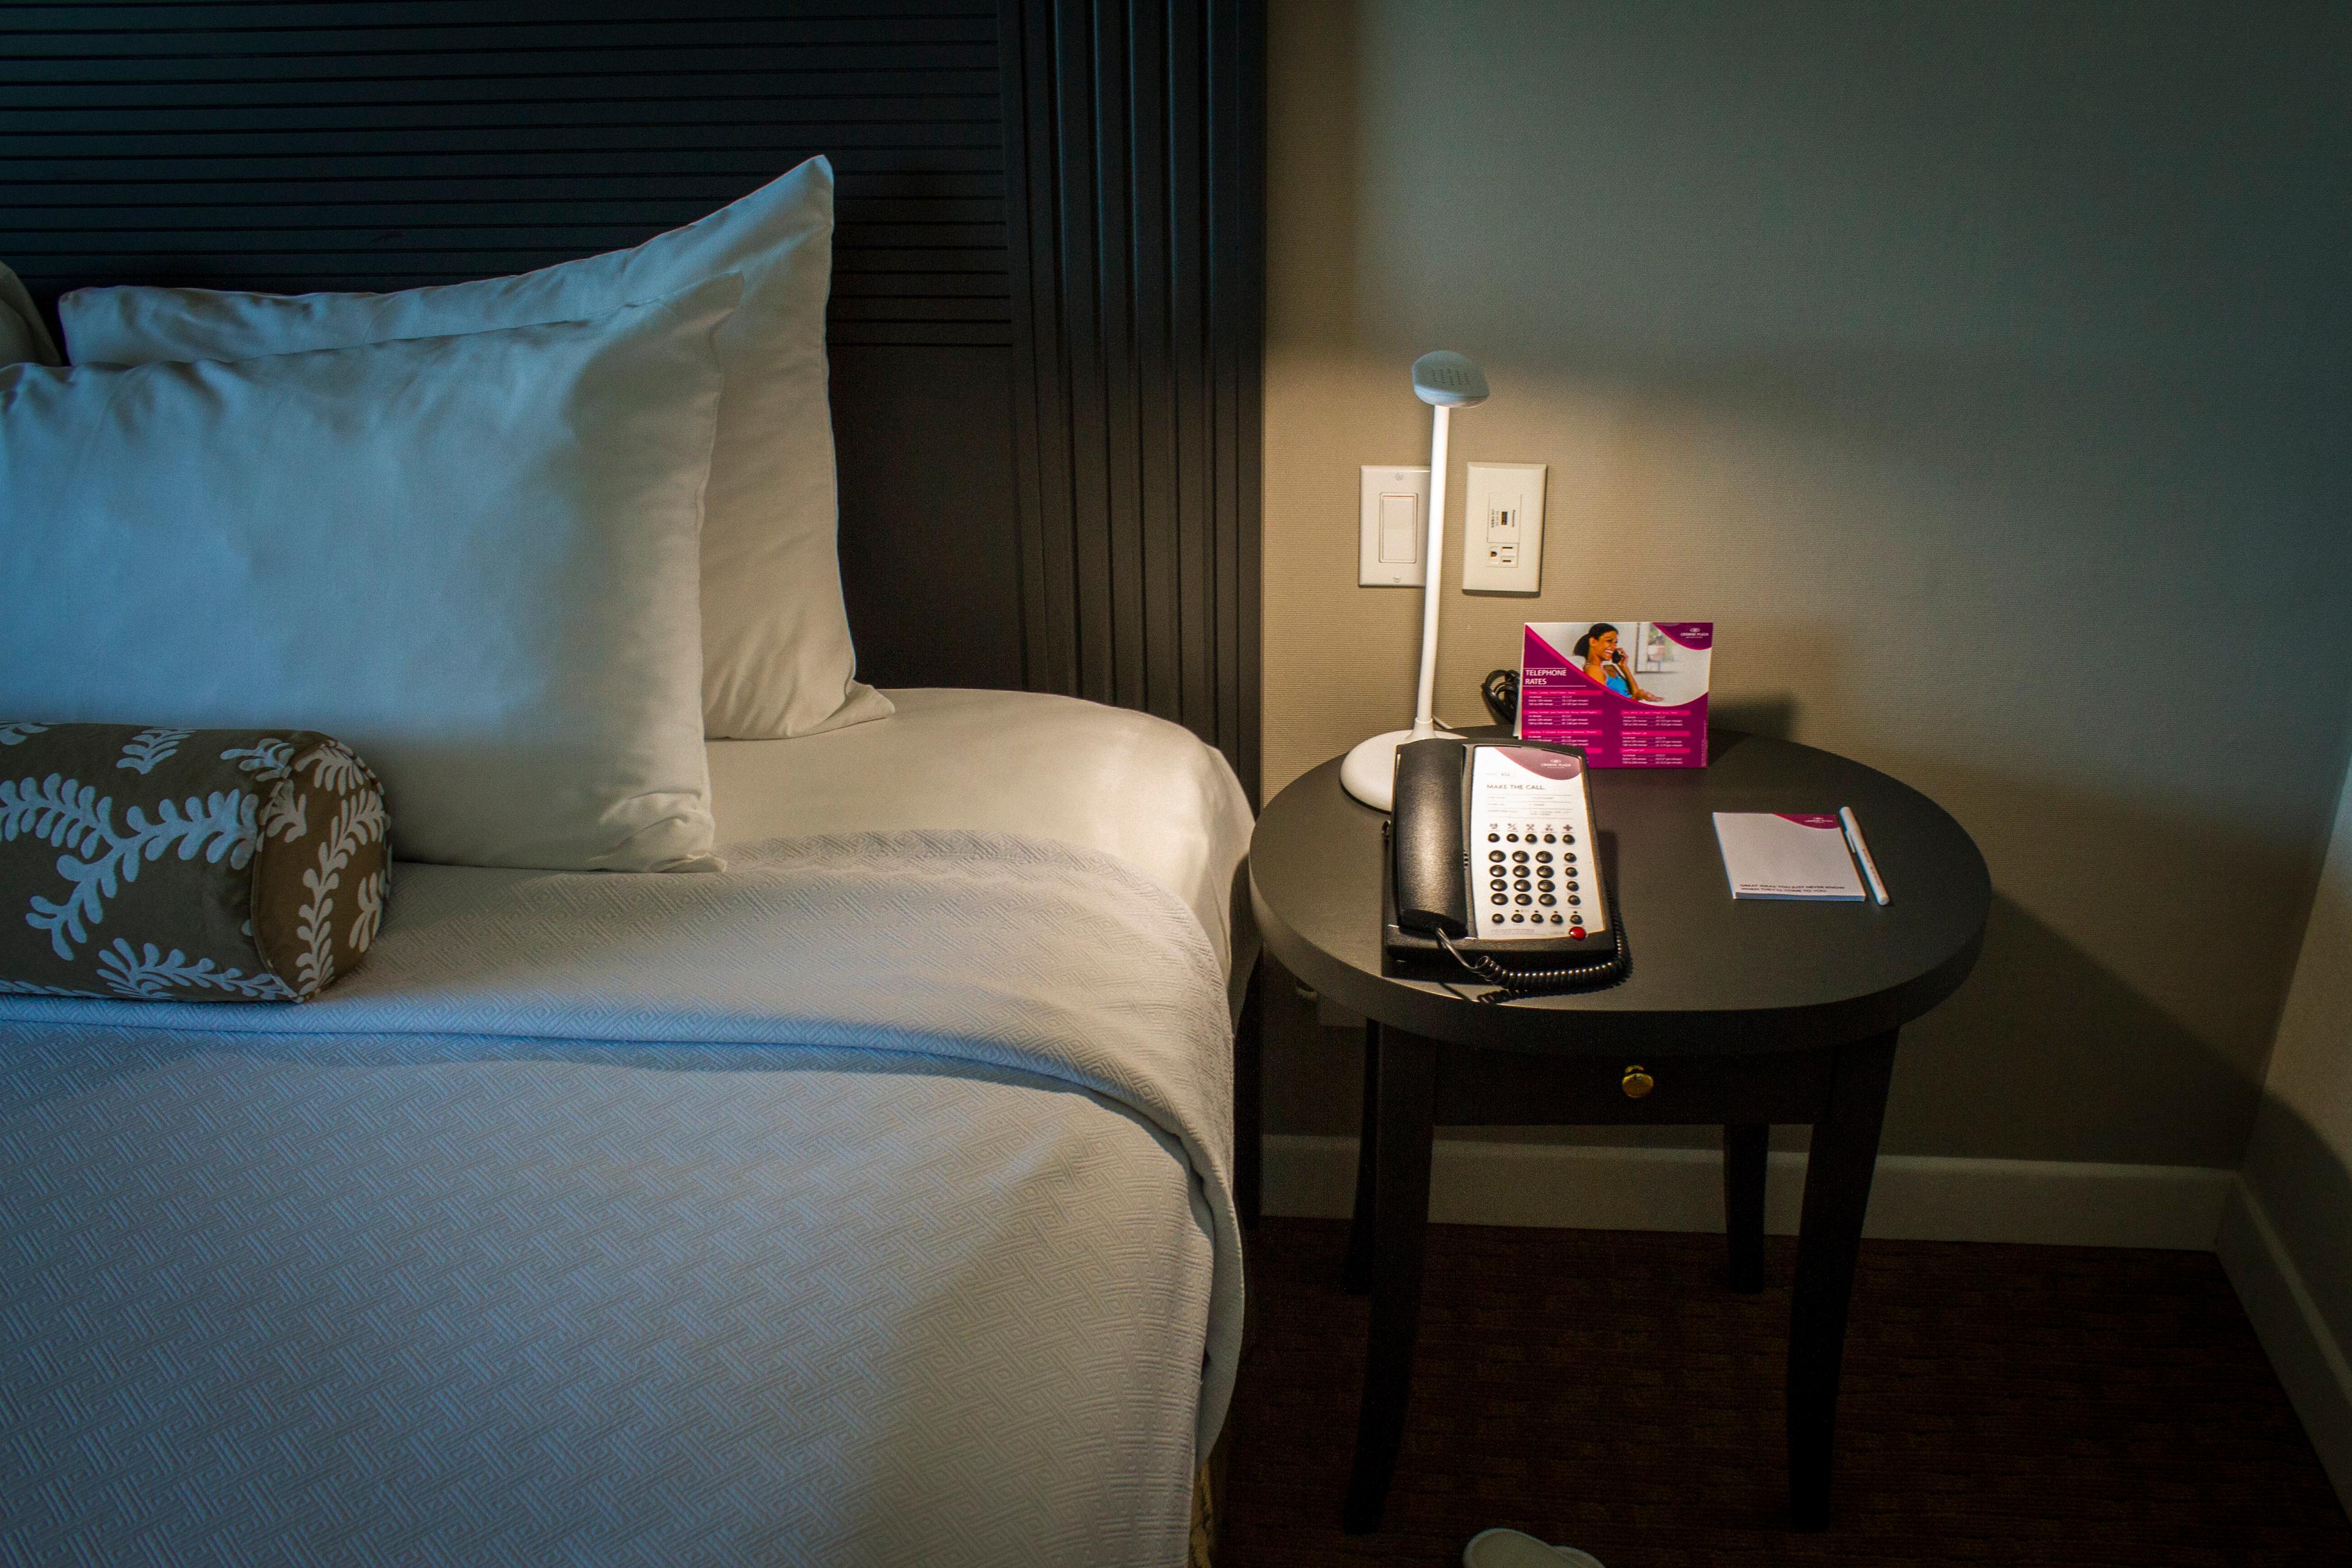 Wood sidetables flank the king-sized bed in the executive suites.